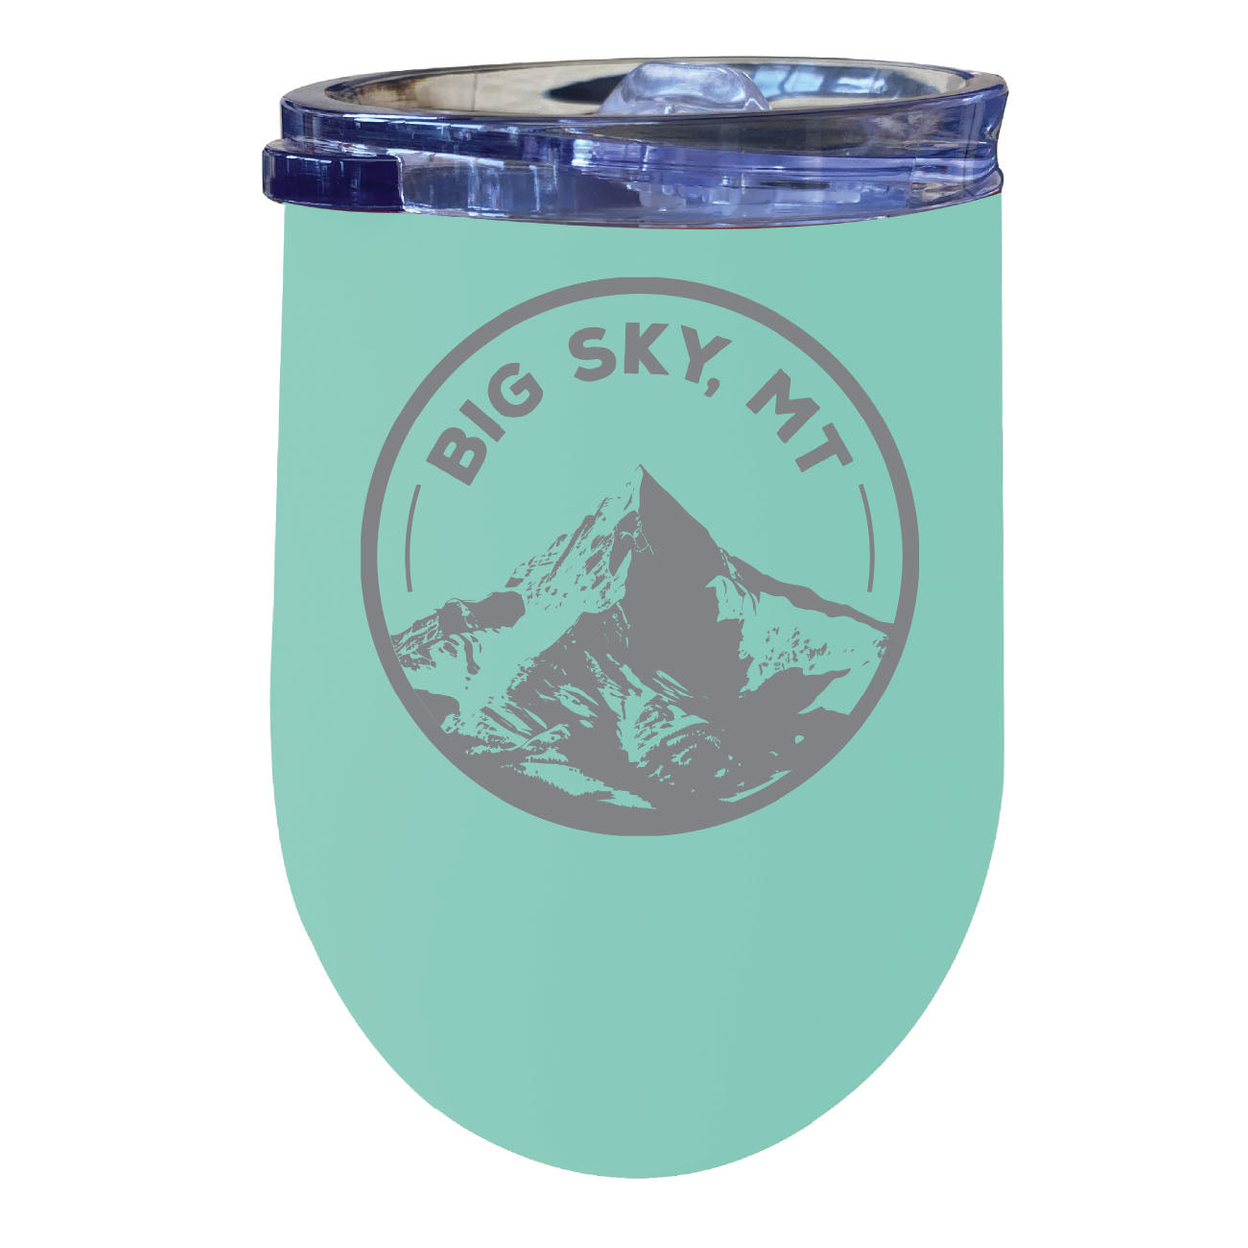 Big Sky Montana Souvenir 12 Oz Engraved Insulated Wine Stainless Steel Tumbler - Seafoam,,2-Pack